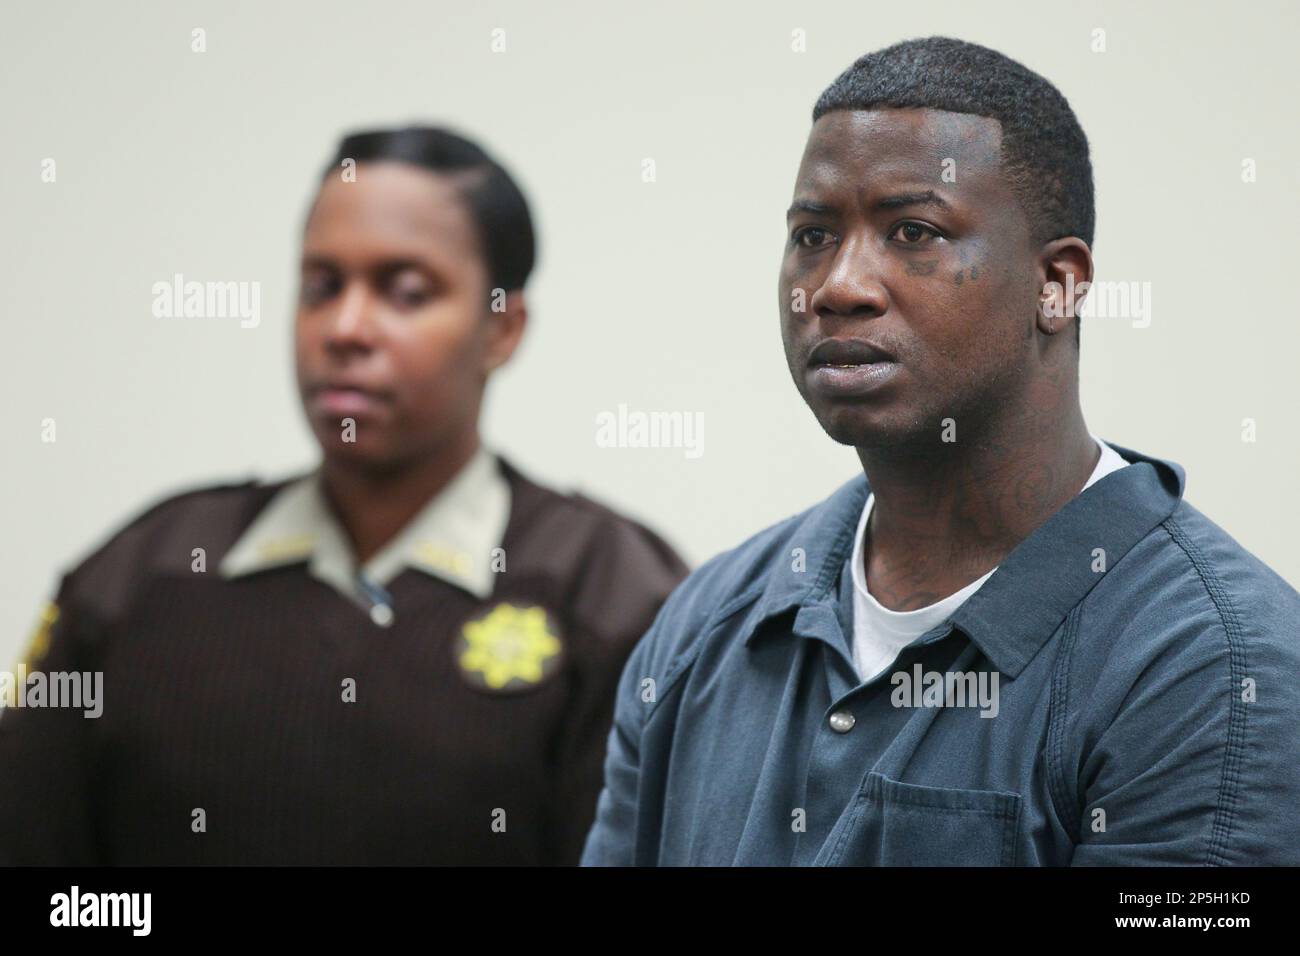 Prosecutor: Gucci Mane faces up to 20 years on federal gun charges